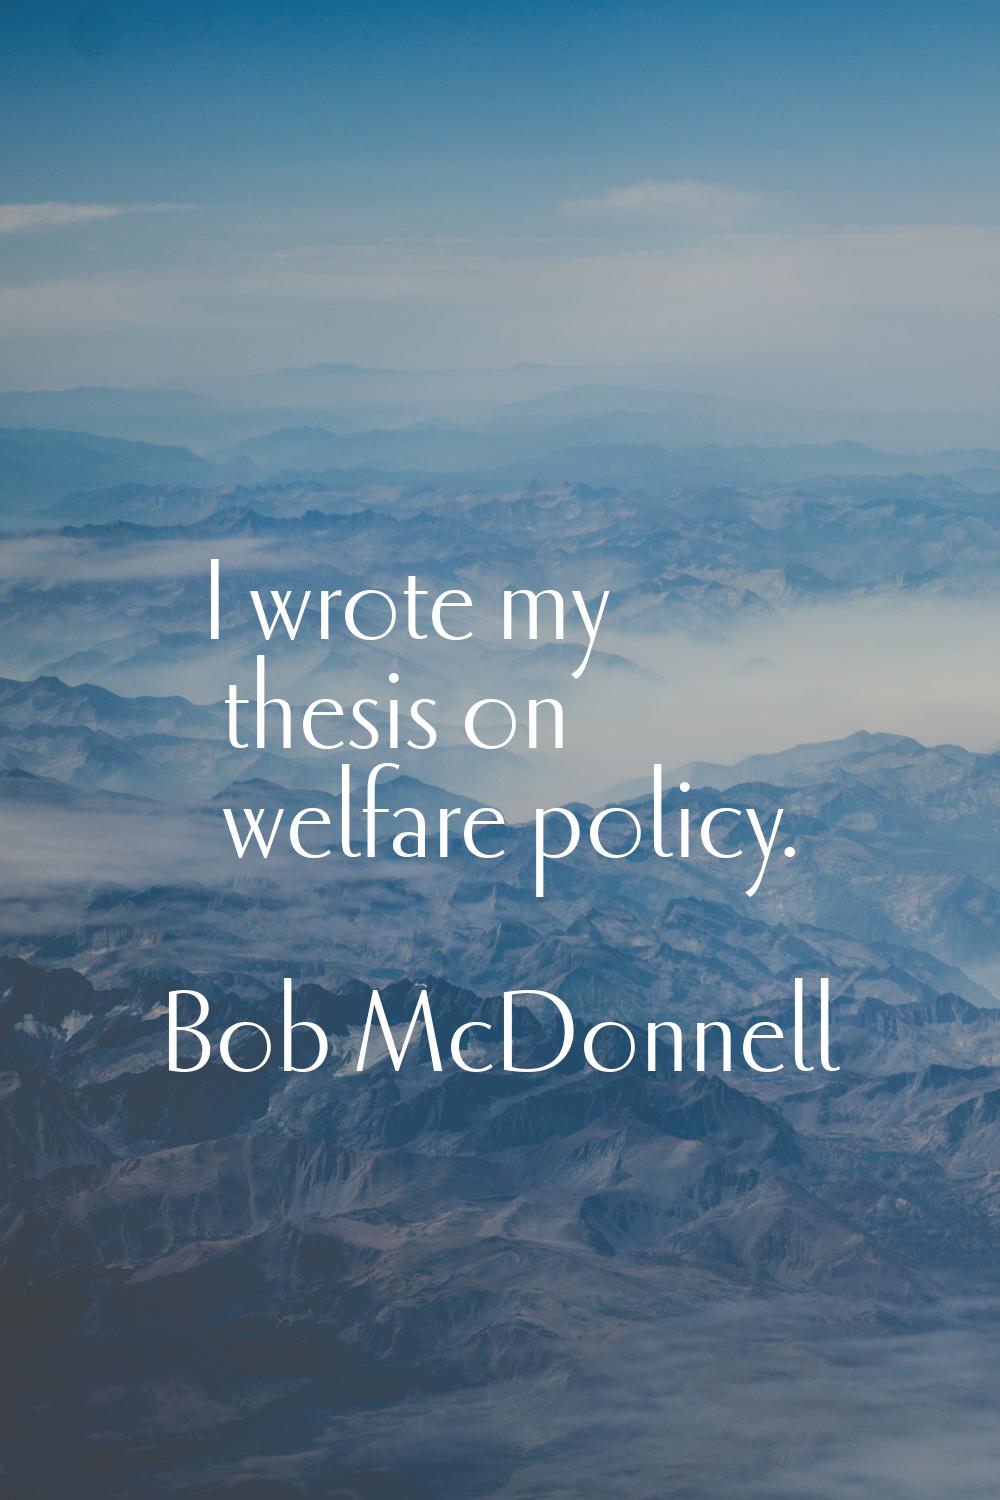 I wrote my thesis on welfare policy.